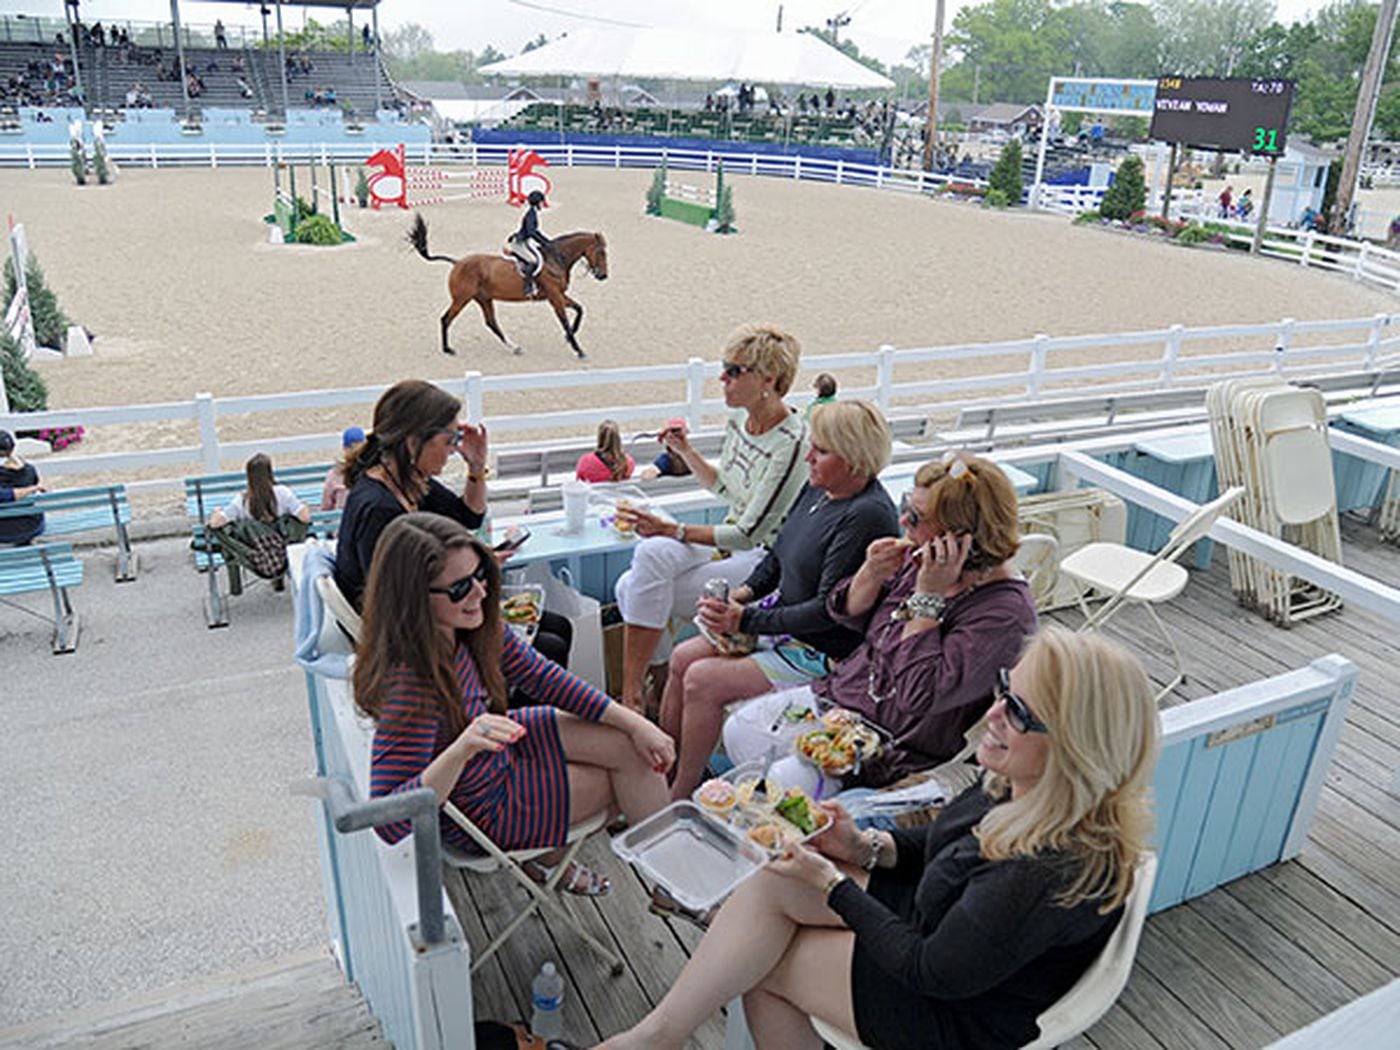 A newbie’s guide to the Devon Horse Show, the crown jewel of Main Line